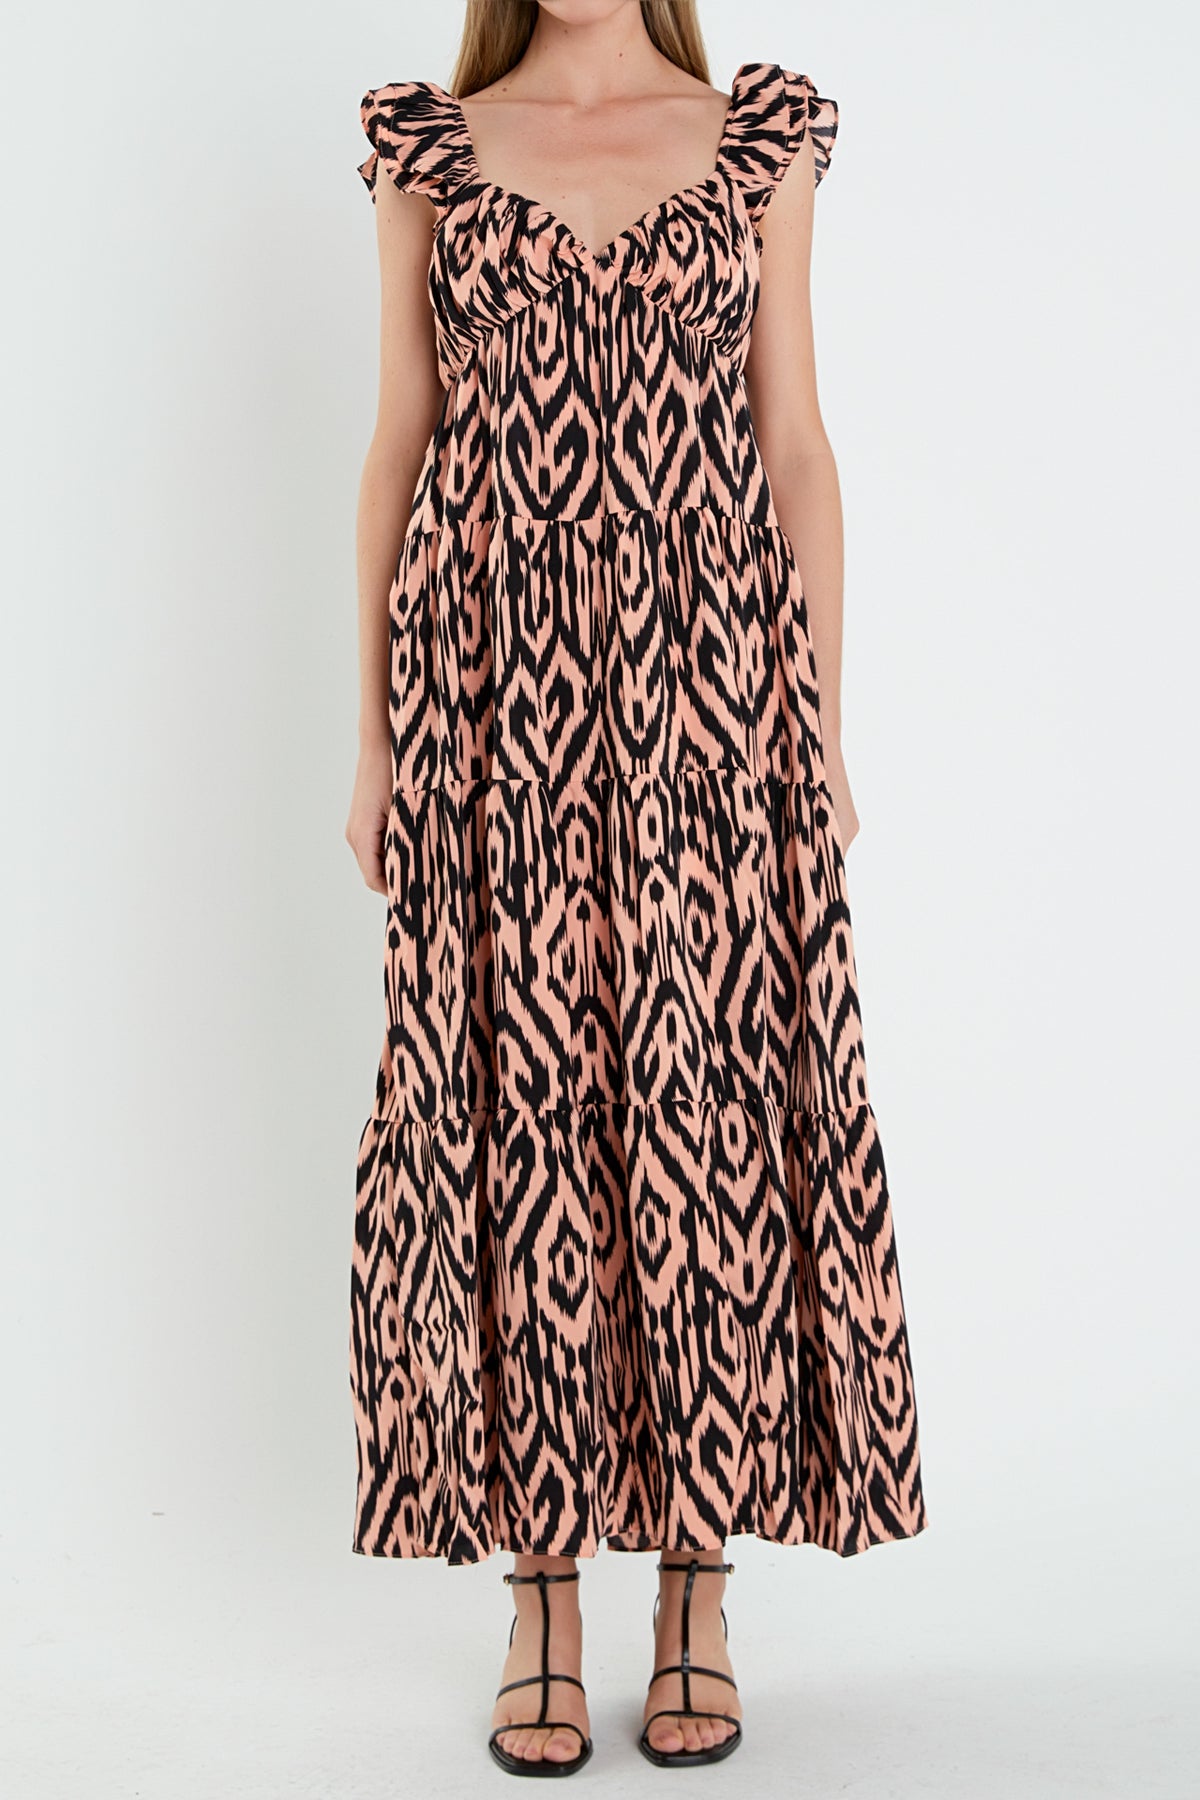 ENGLISH FACTORY - Tiger Print Ruffle Sleeve Maxi Dress - DRESSES available at Objectrare